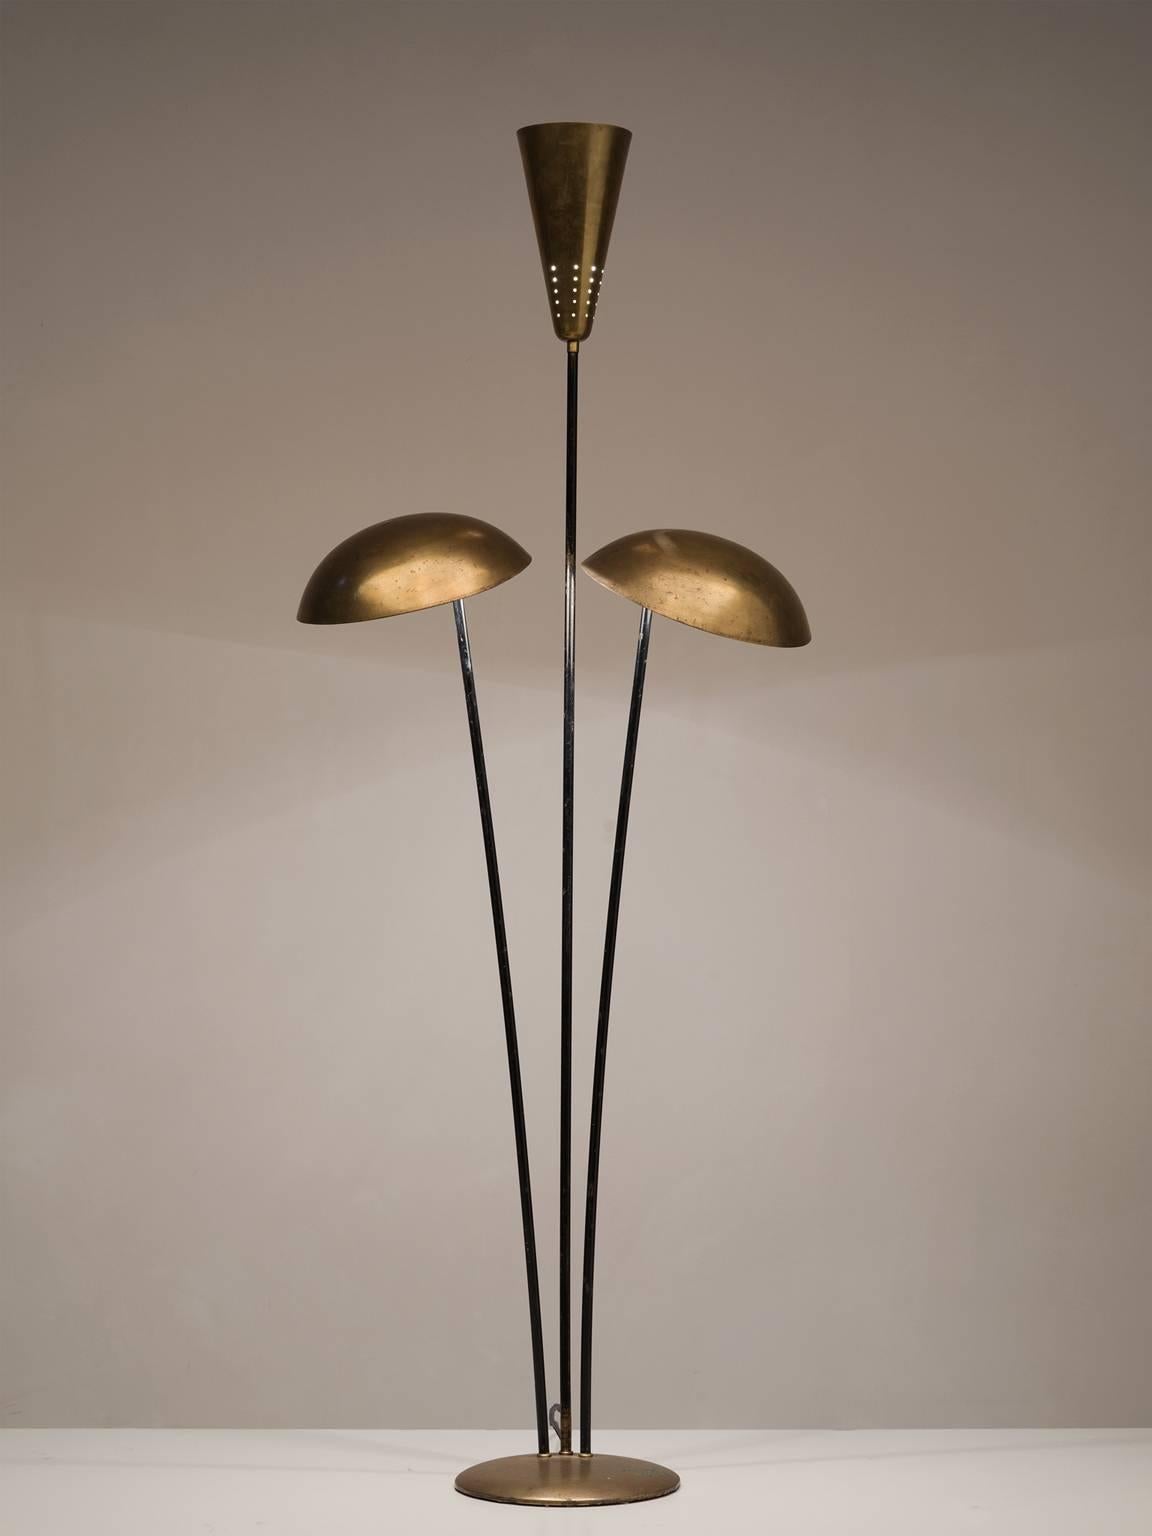 Floor lamp in metal and brass, Hildegard Liertz for Hesse-Lamps, Germany, 1970s. 

This playful floor lamp features three separate rods that lead to three brass lamp shades. The middle shade is cone shaped whereas the outer shades are bowl-shaped.